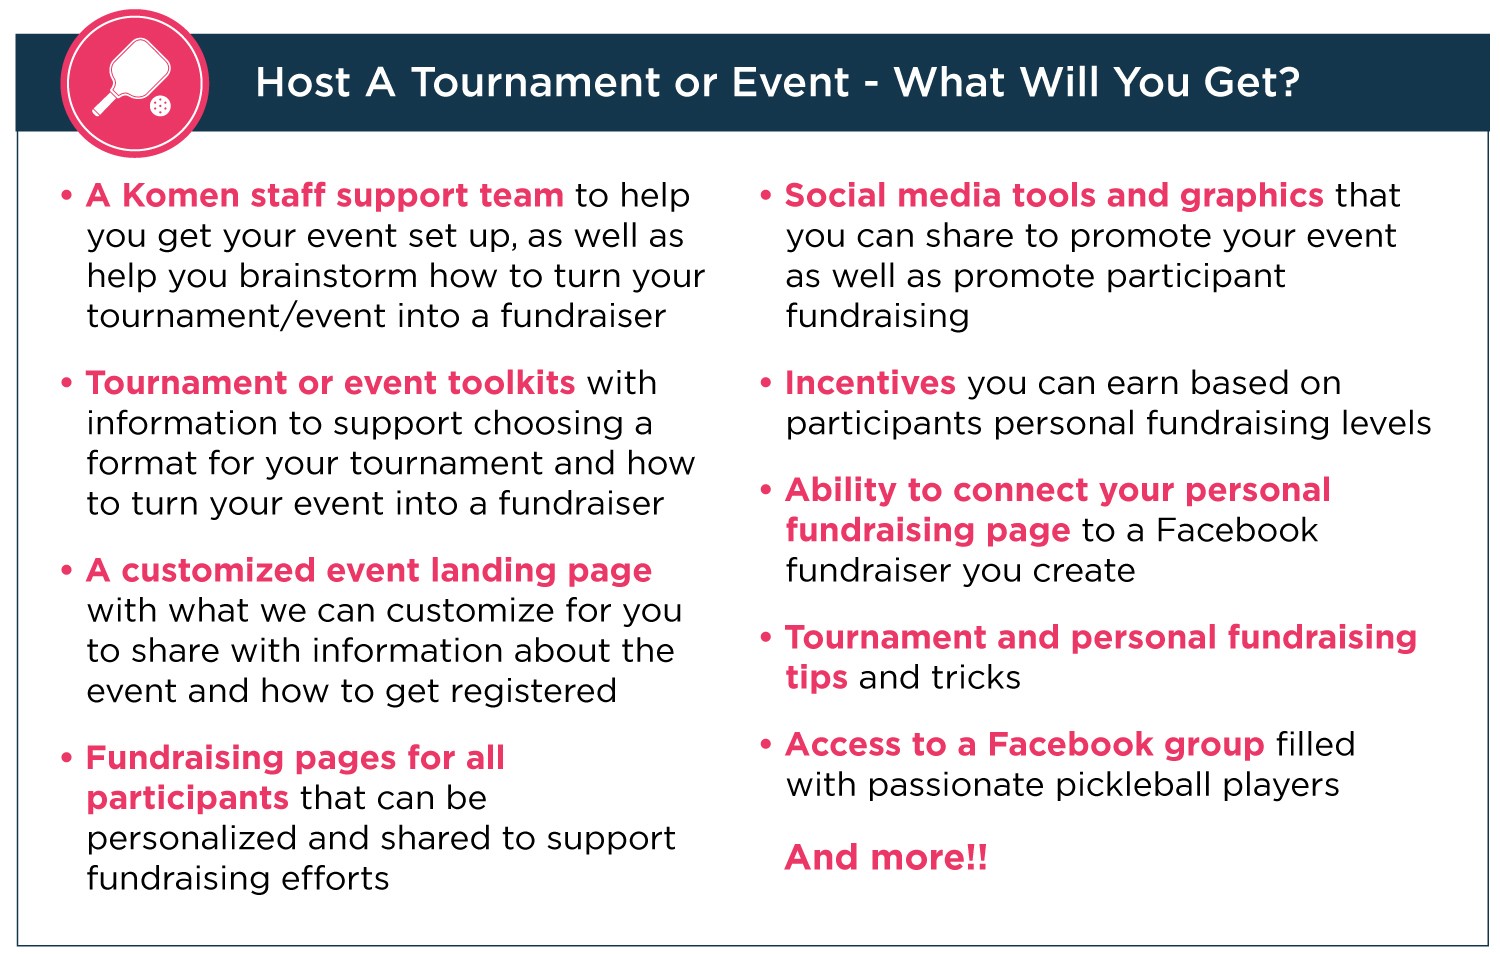 Host a tournament or event--what will you get?